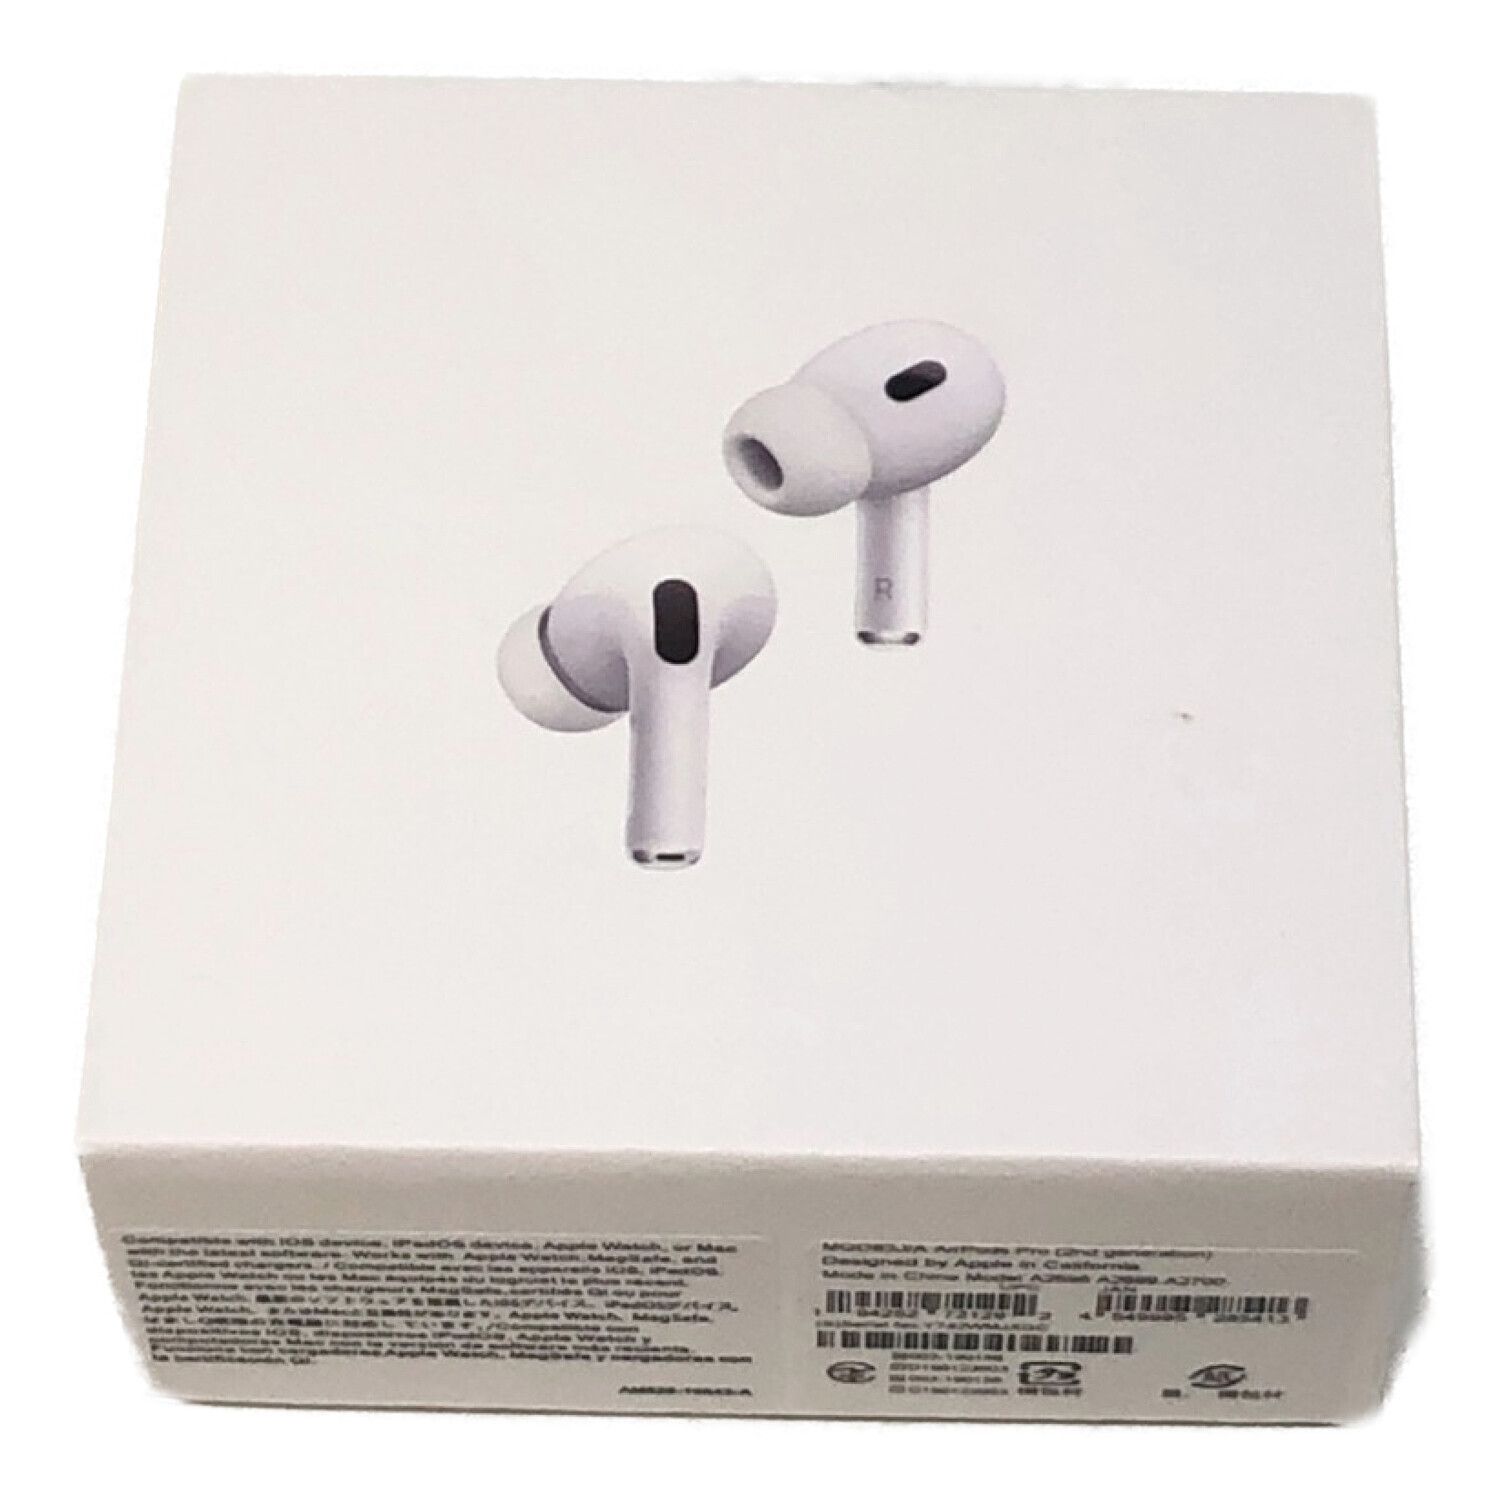 Apple AirPods Pro (2nd generation) MQD83J/A